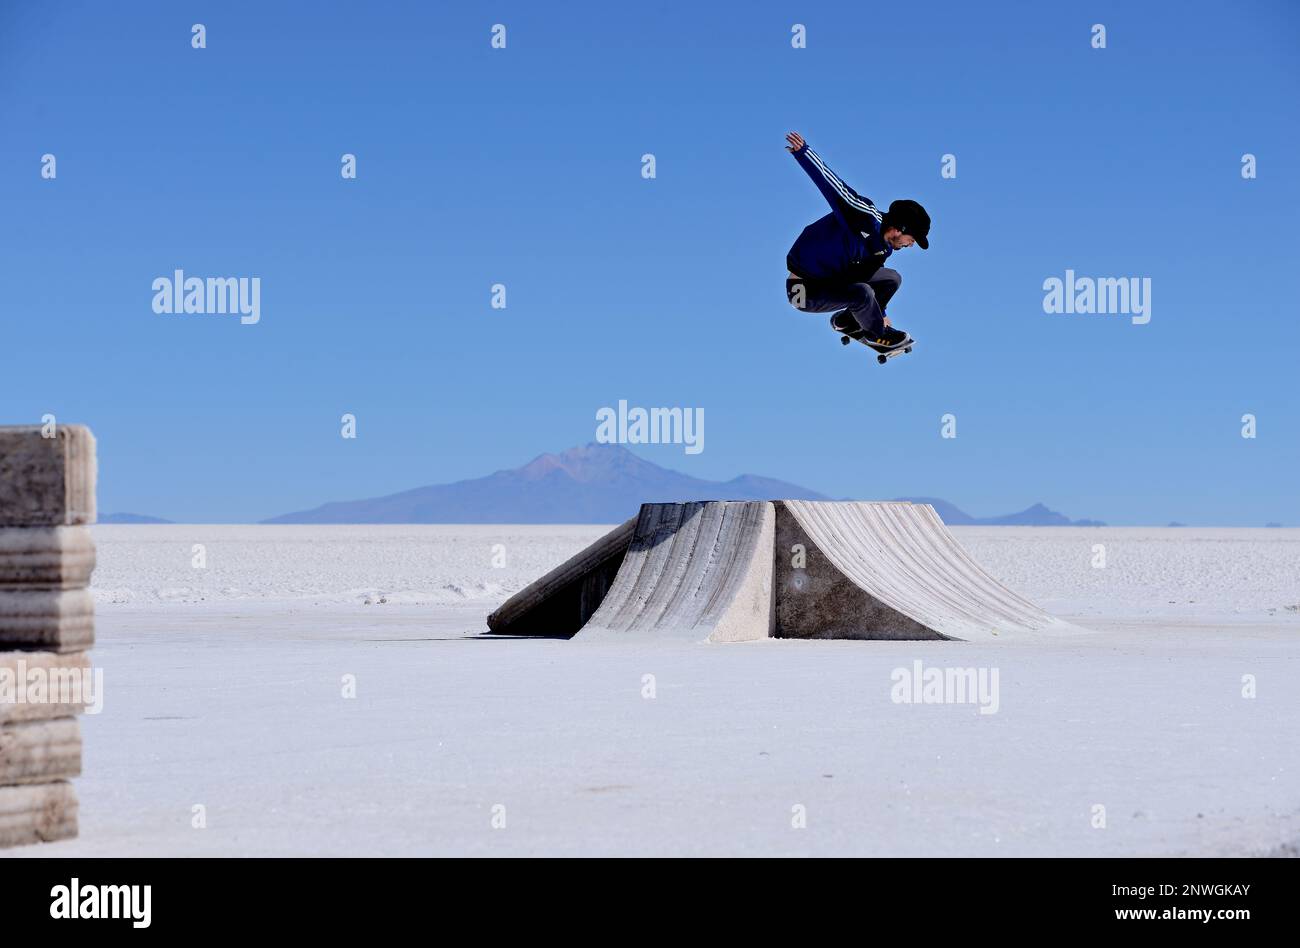 strå længst horisont Check out this selection of last week's editorial photos from the world of  Red Bull. // Luciano Cristobal doing a japan during the production of the  White Desert project in Uyuni Salt